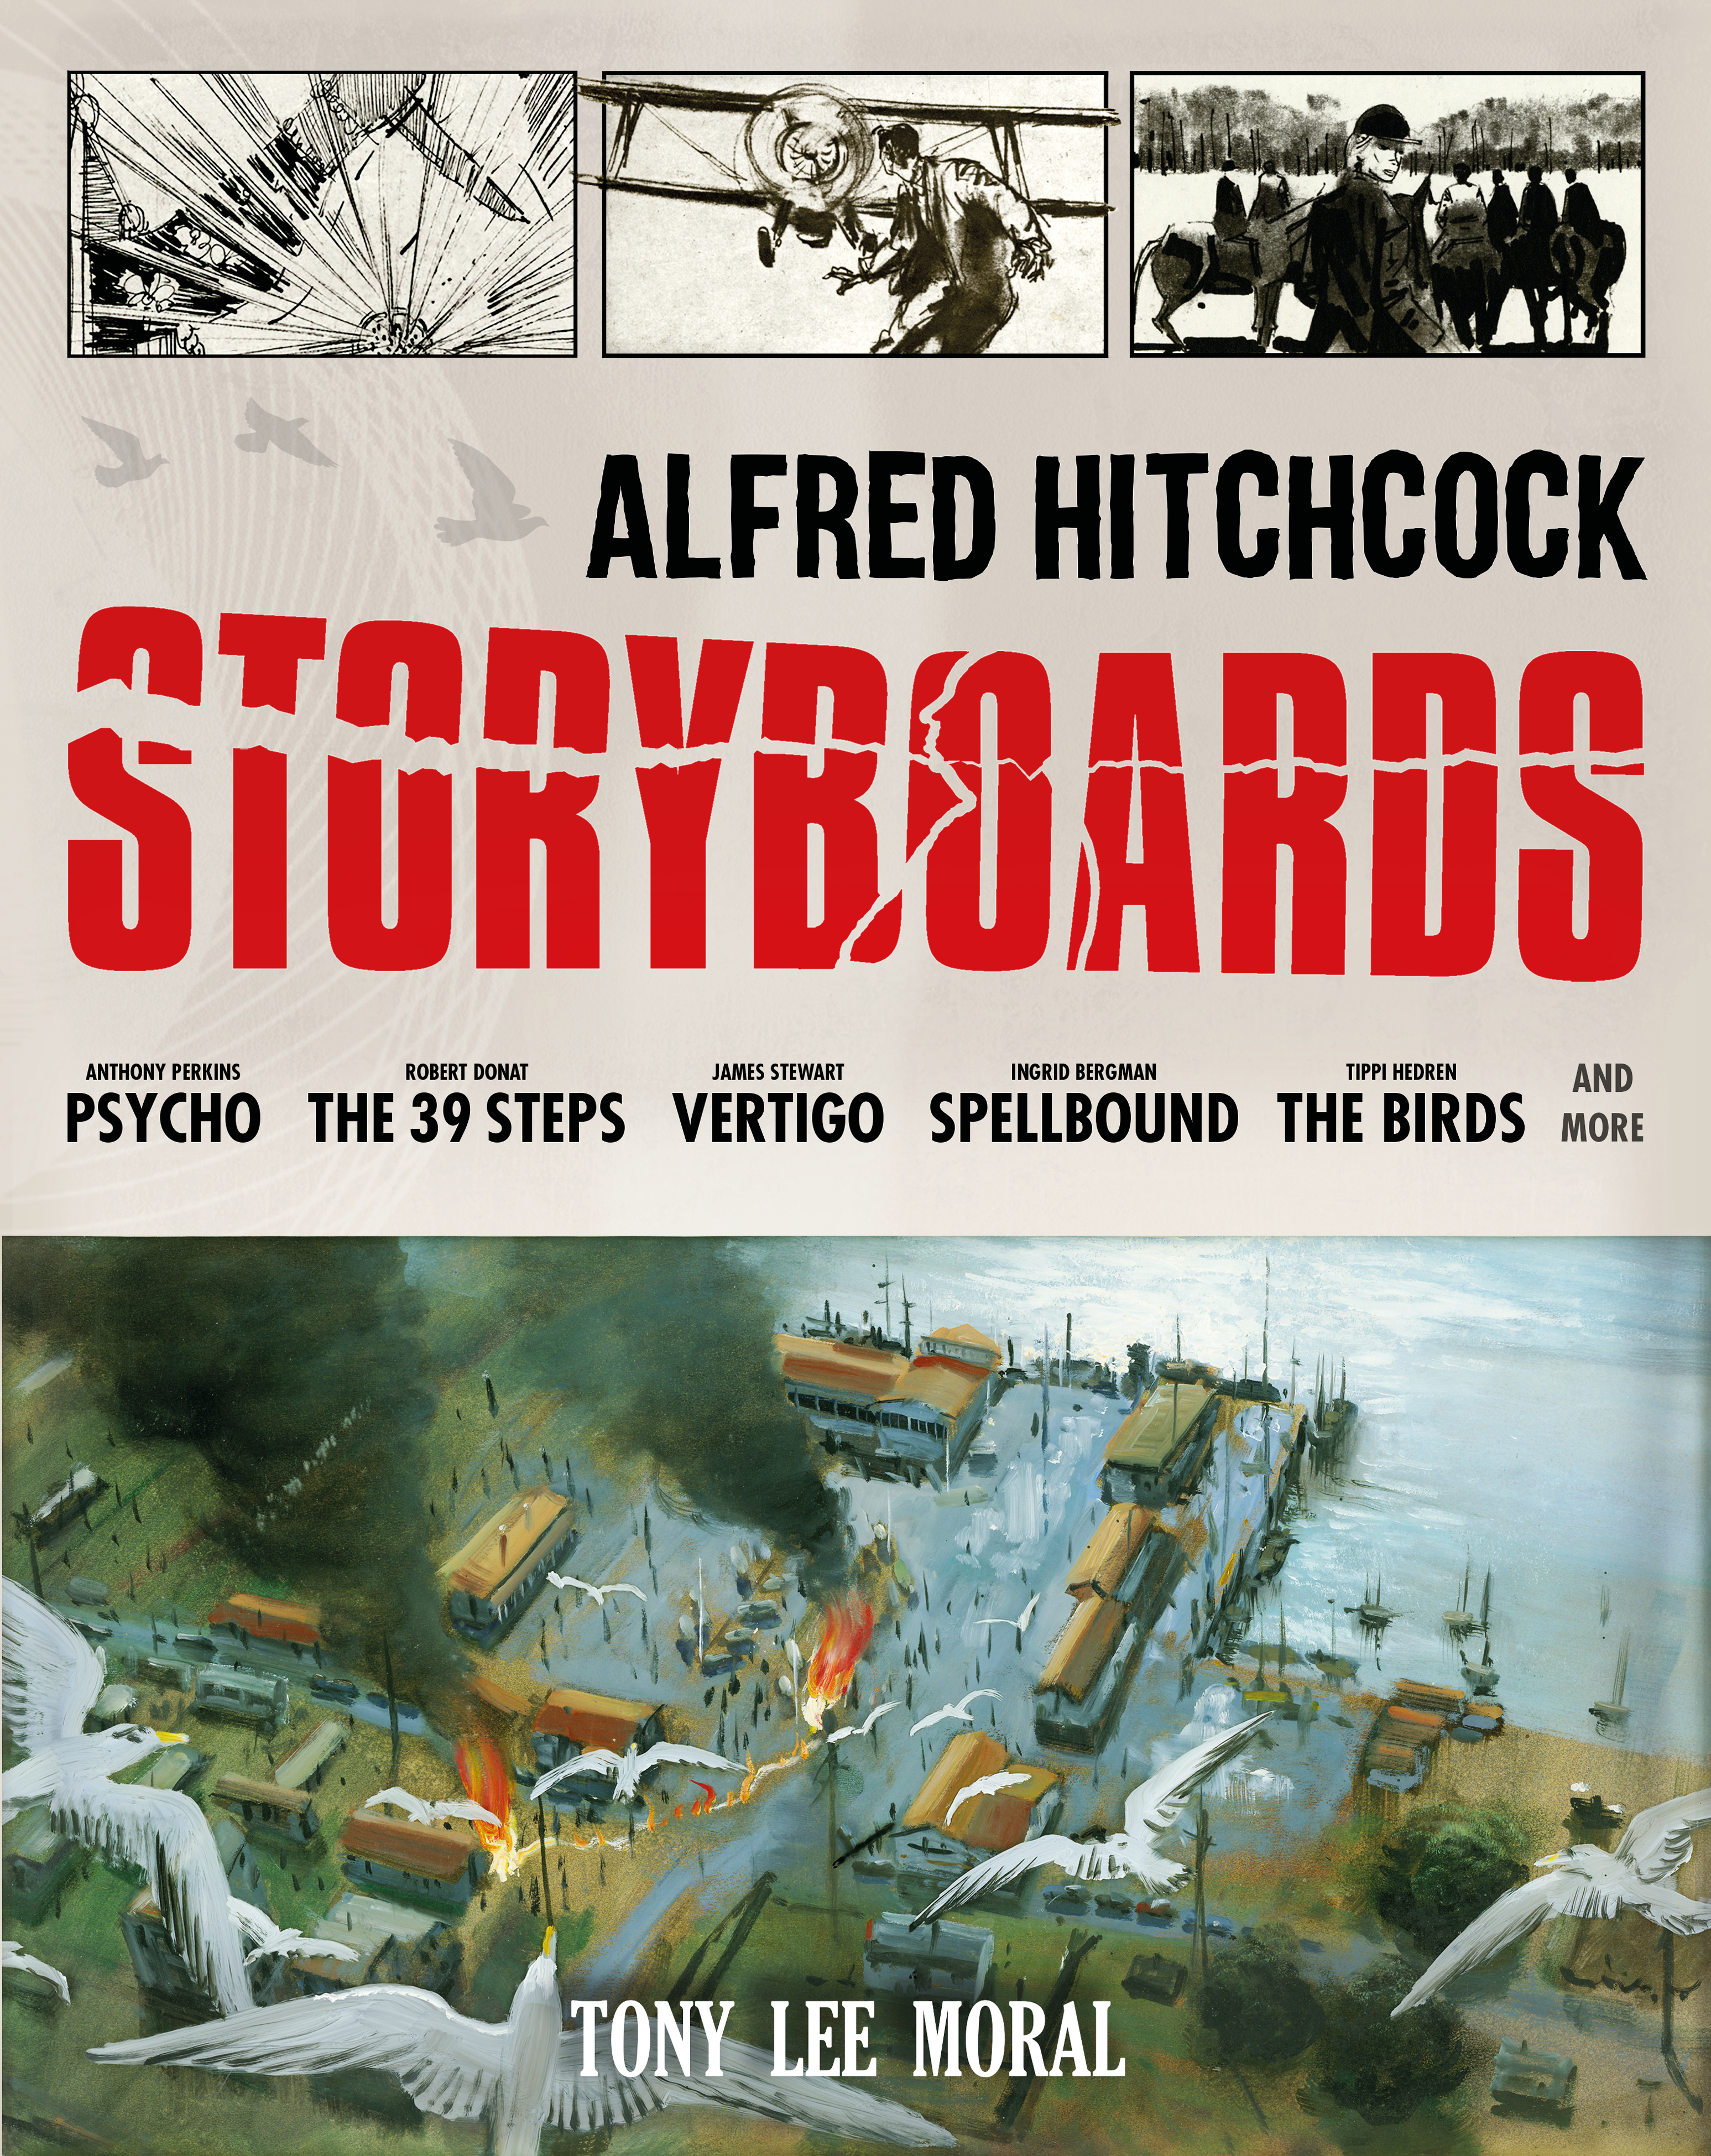 Alfred Hitchcock Storyboards @ Titan Books